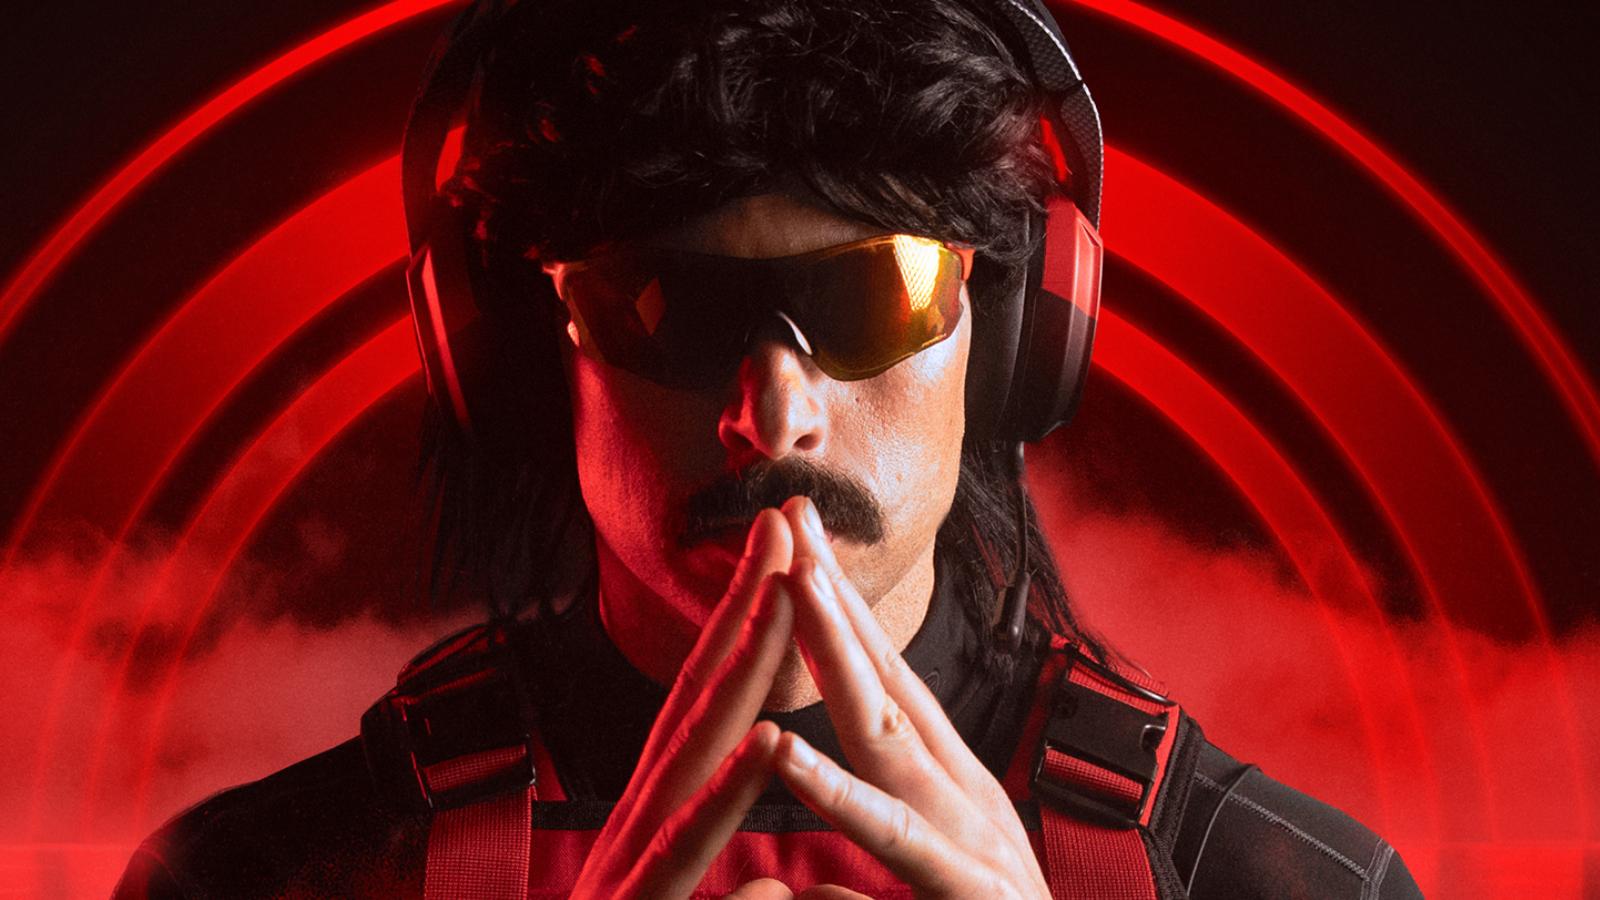 dr disrespect thinking hands together